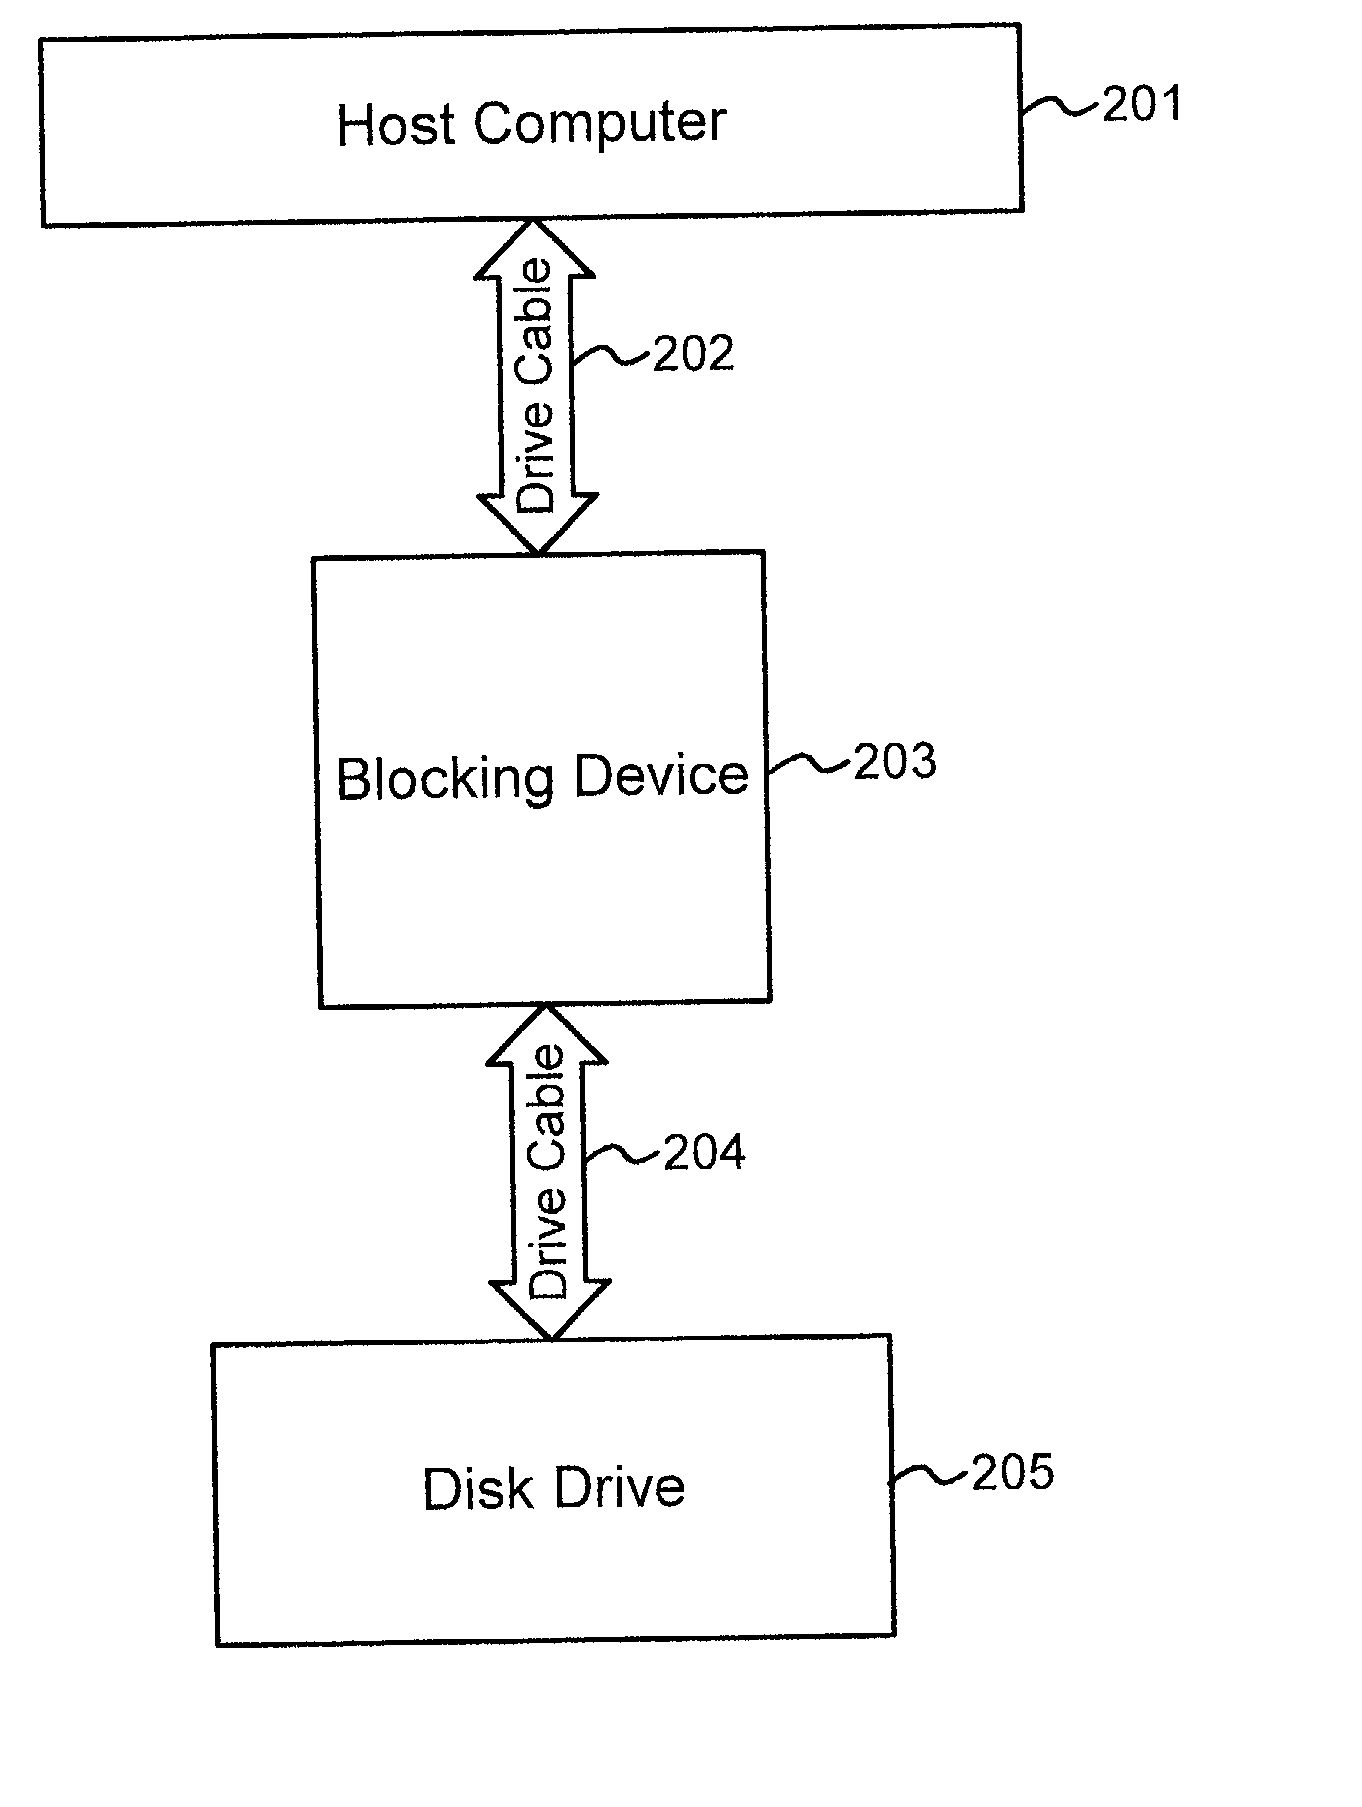 Write protection for computer long-term memory devices